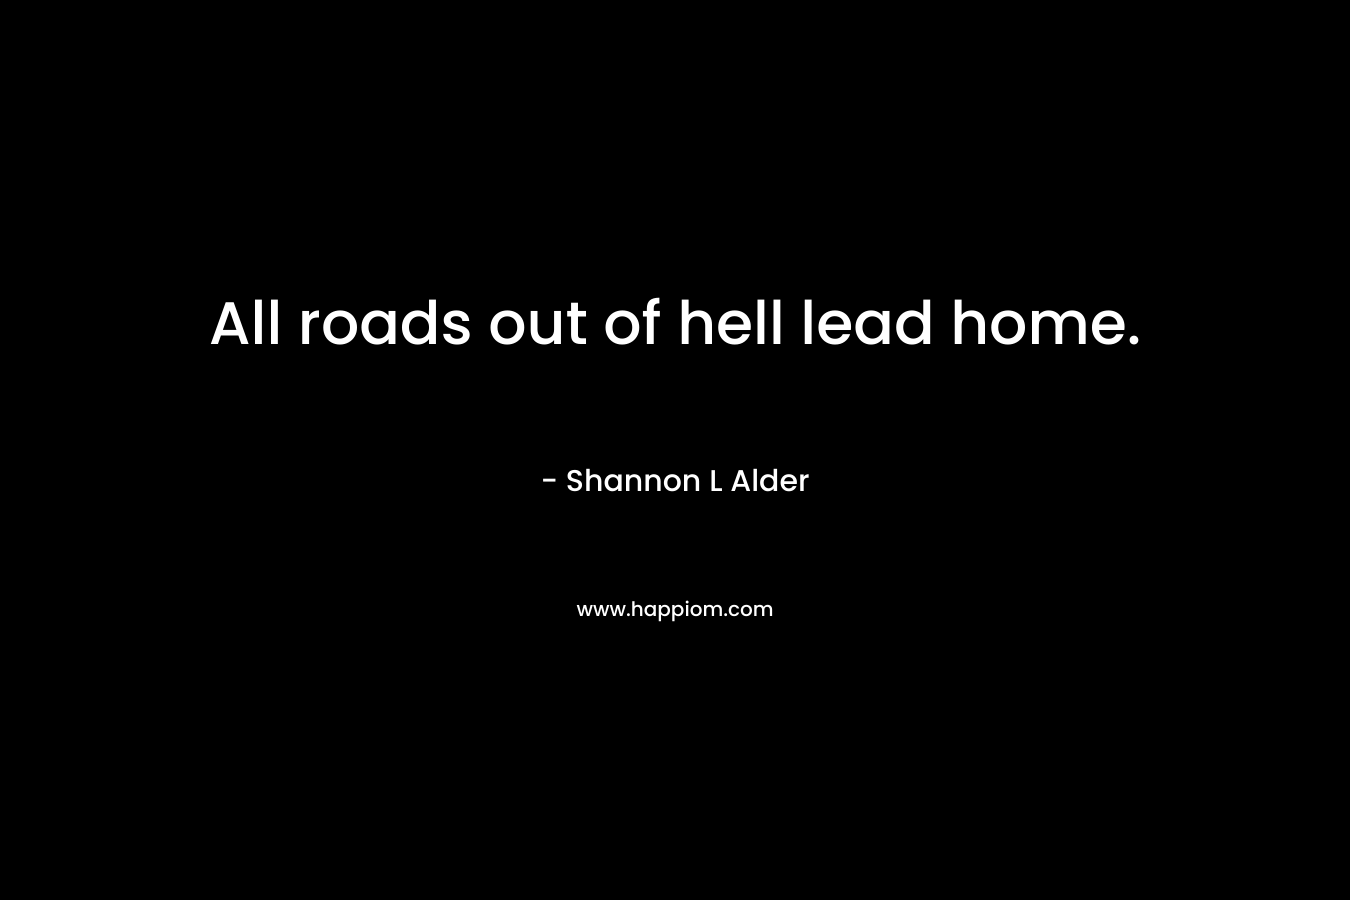 All roads out of hell lead home.